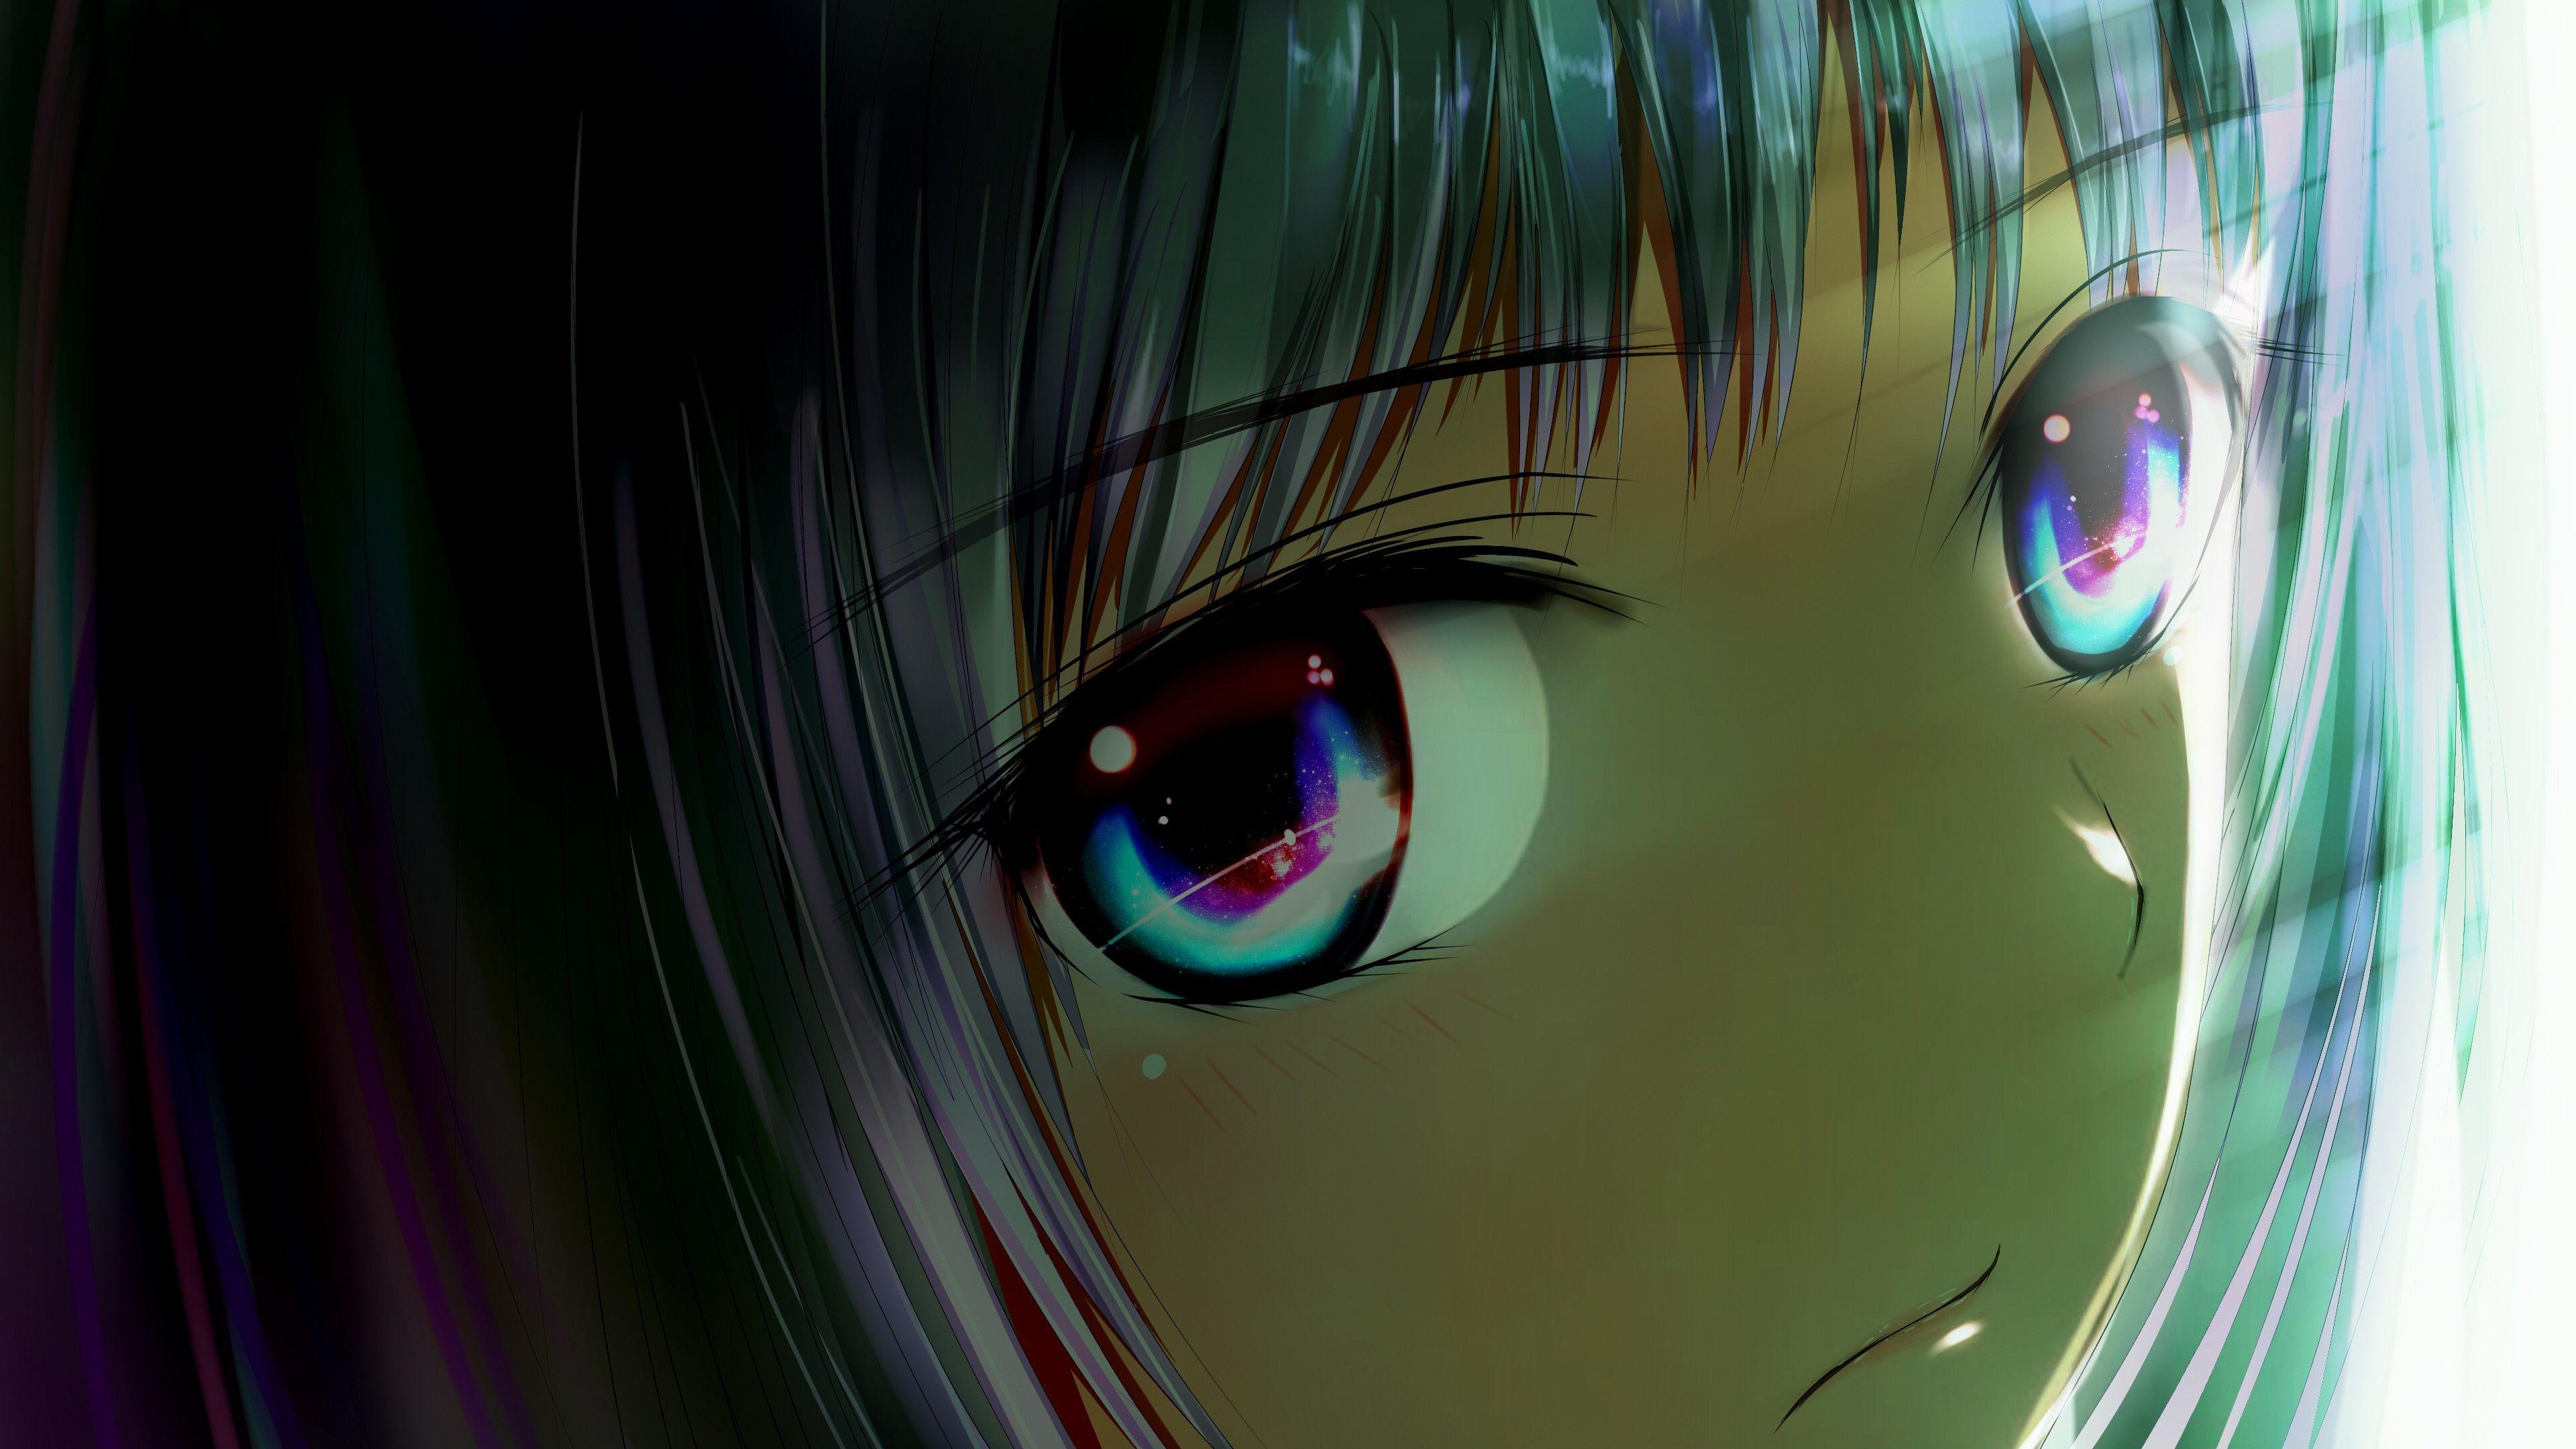 Anime Eyes Wallpapers - Top Free Anime Eyes Backgrounds - Wallpaperaccess